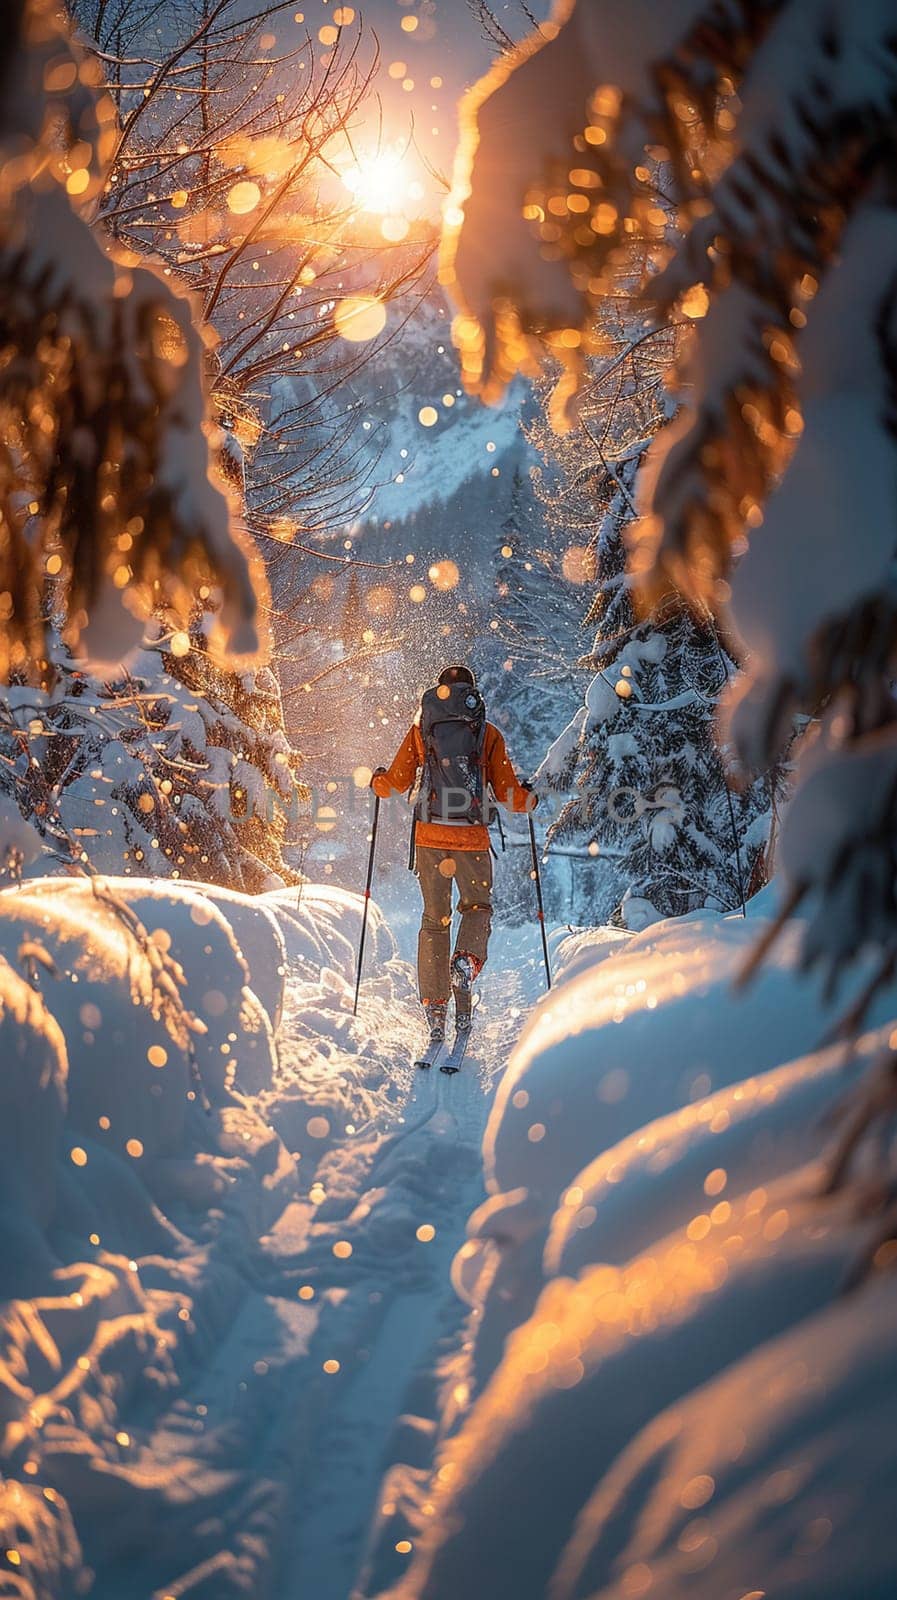 Cross-country skiing through a winter wonderland, embodying endurance and beauty.